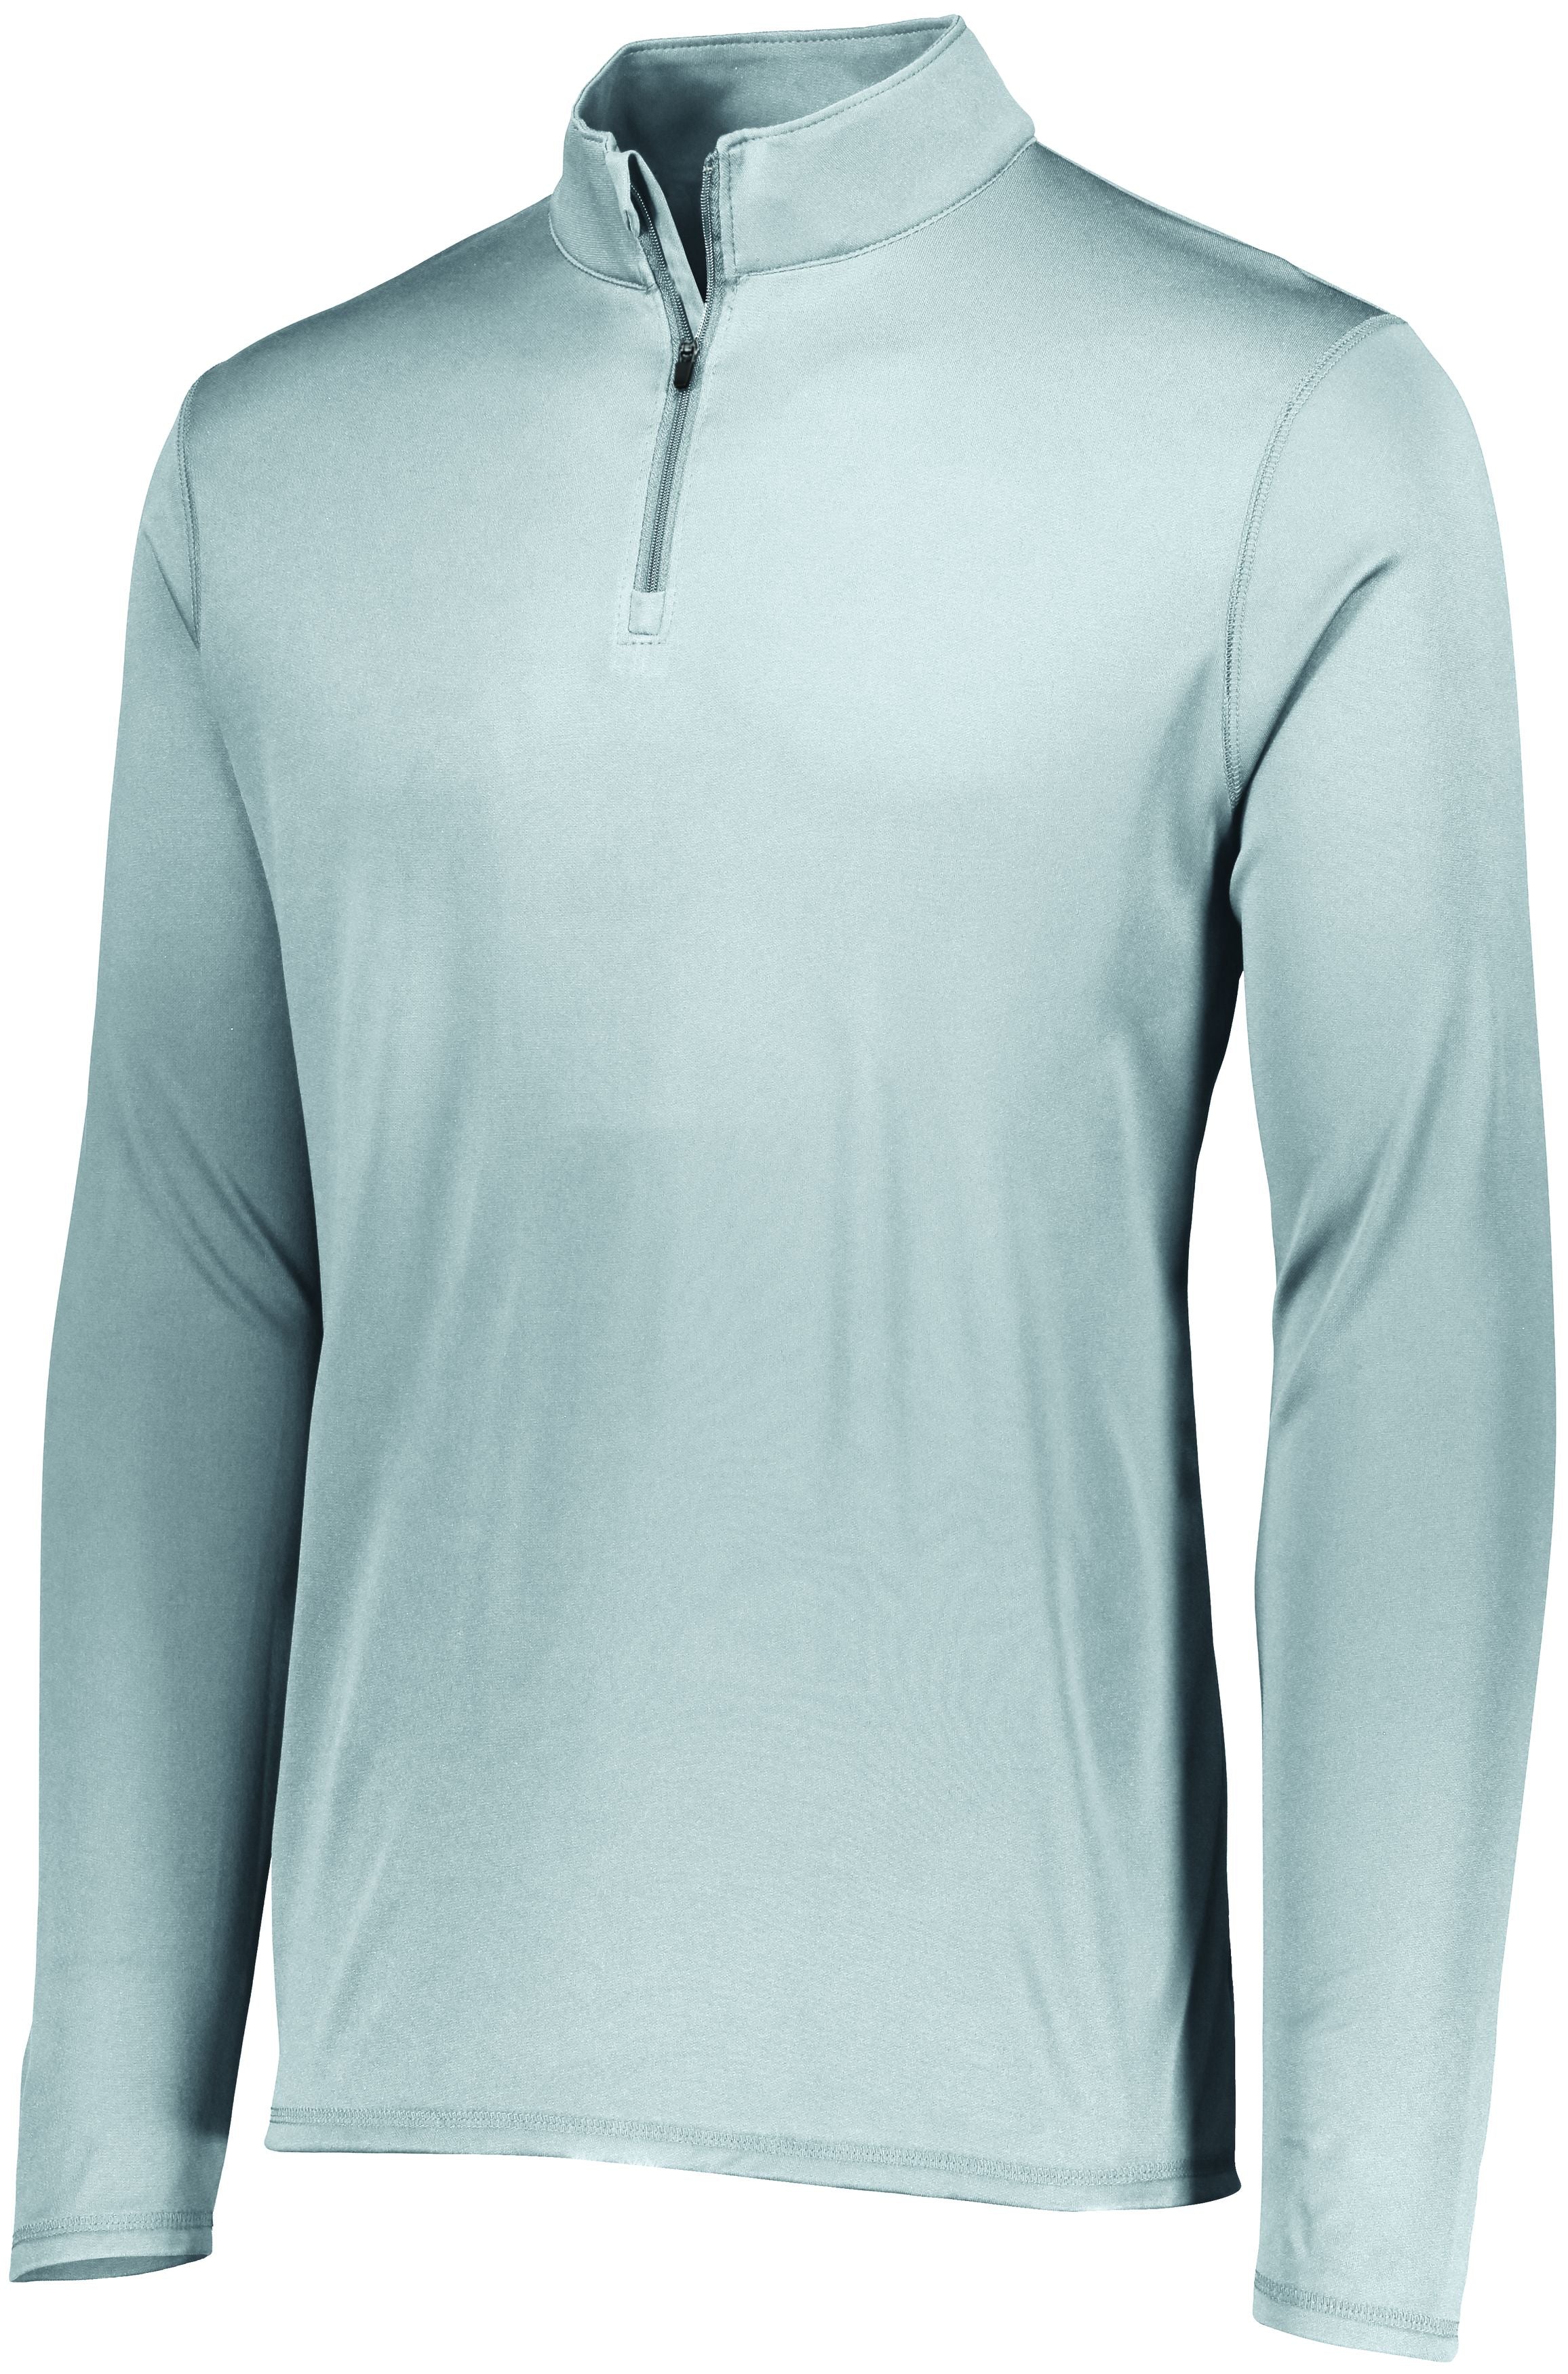 Augusta Sportswear Attain Wicking 1/4 Zip Pullover in Silver  -Part of the Adult, Adult-Pullover, Augusta-Products, Outerwear product lines at KanaleyCreations.com